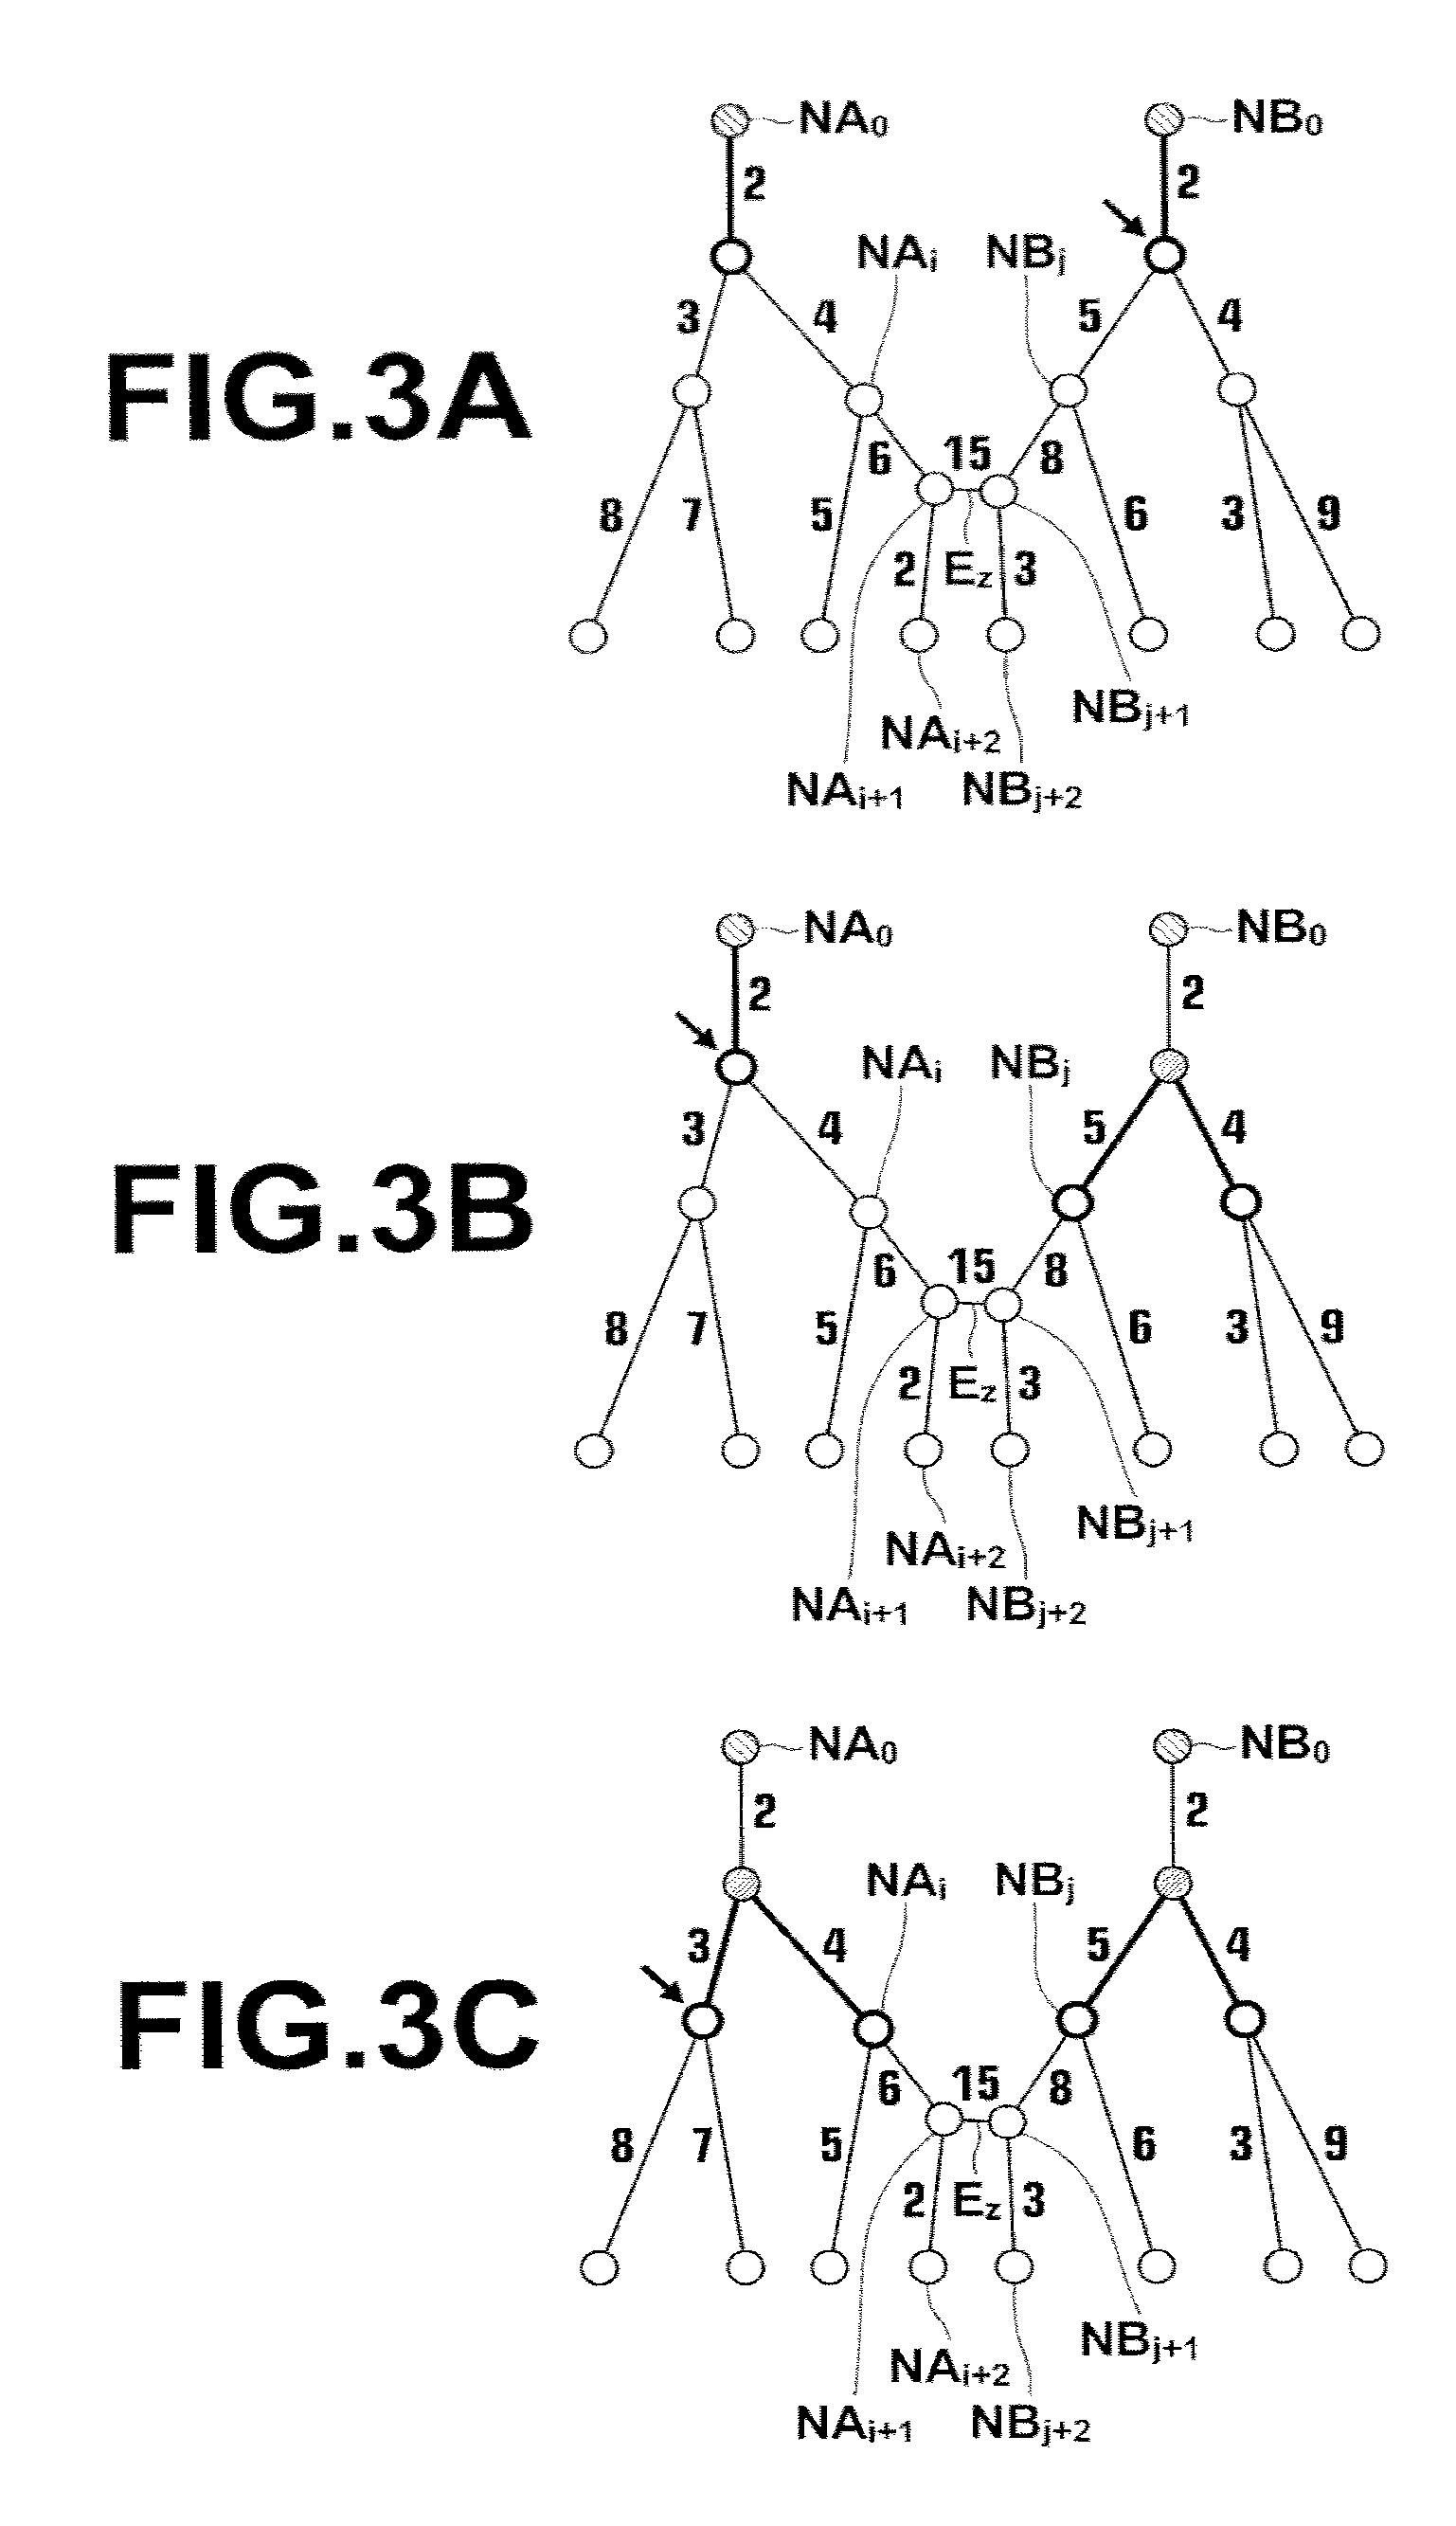 Tree structure extraction apparatus, method and program